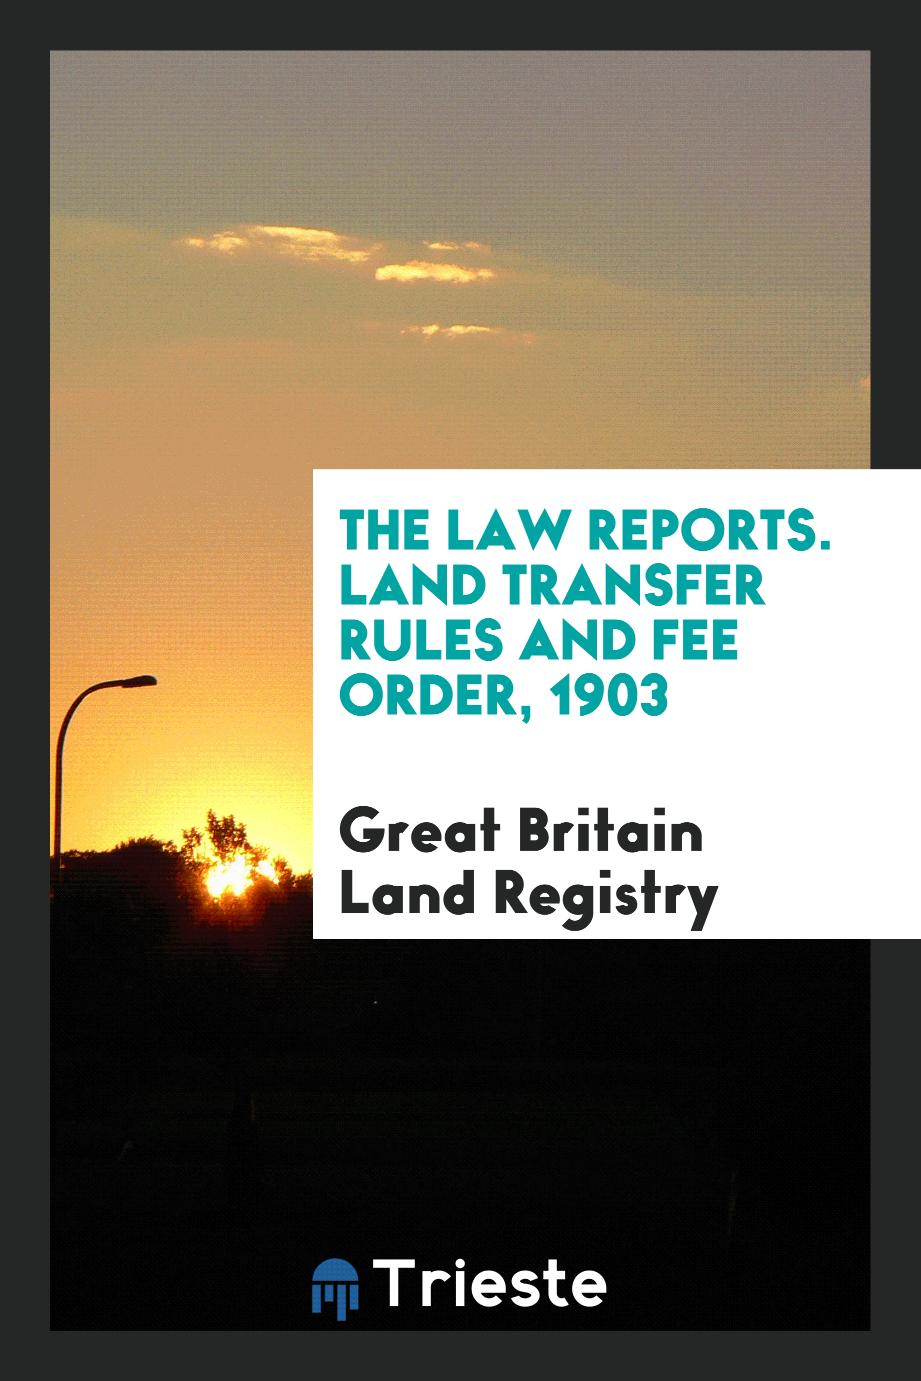 The Law Reports. Land Transfer Rules and Fee Order, 1903